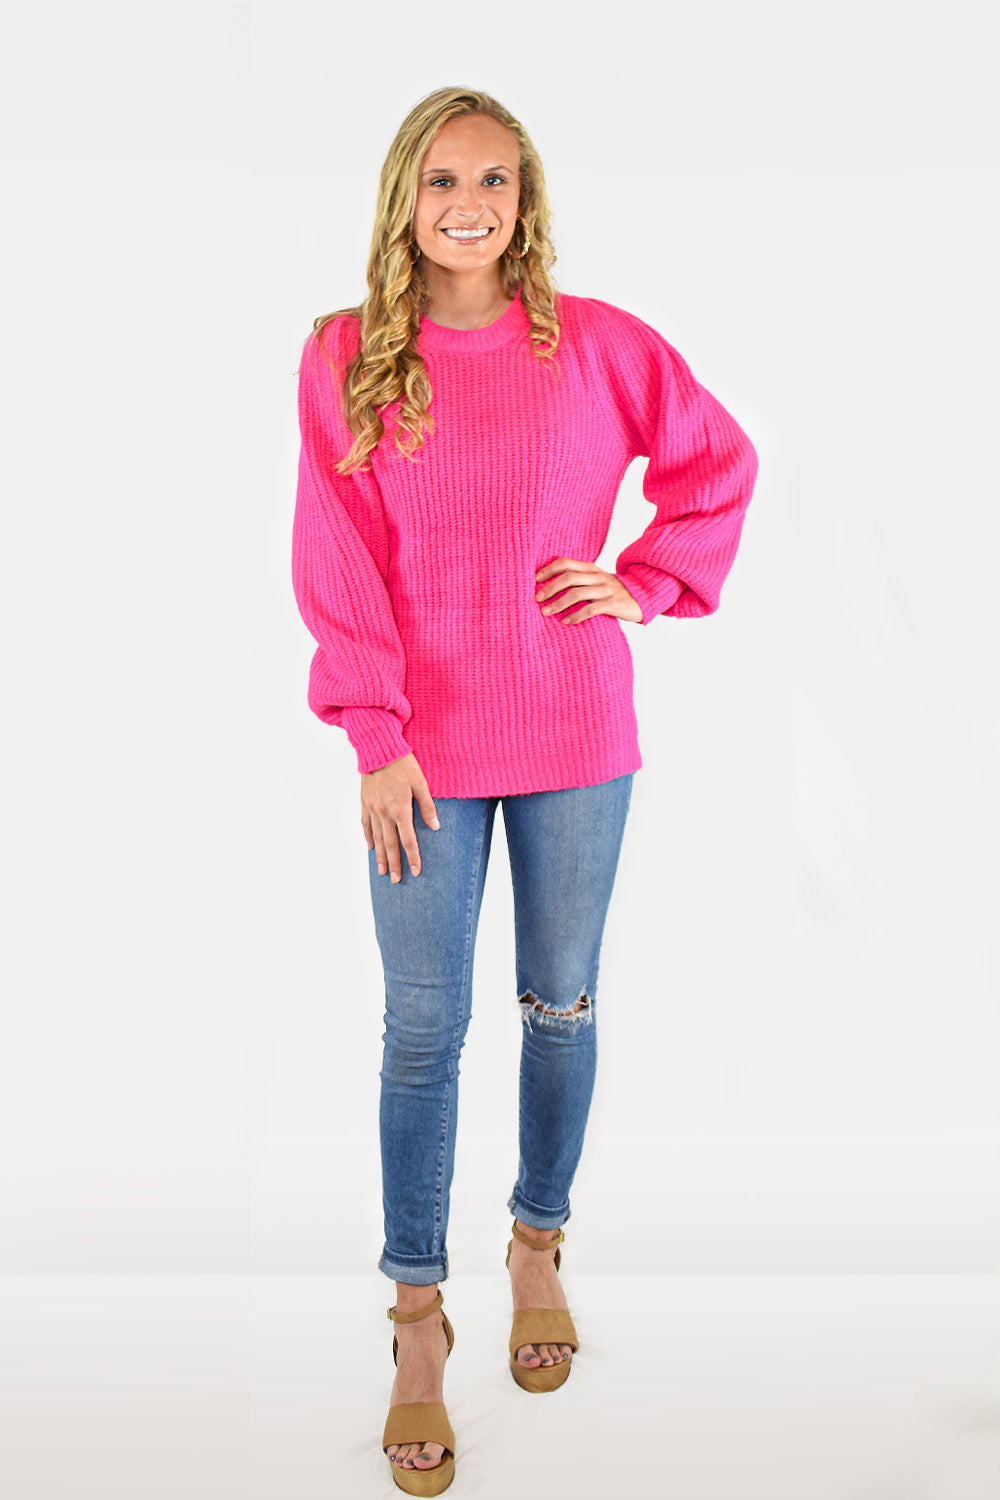 Hot Pink Thick Knit Balloon Sleeve Pullover Sweater by Jodifl Clothing